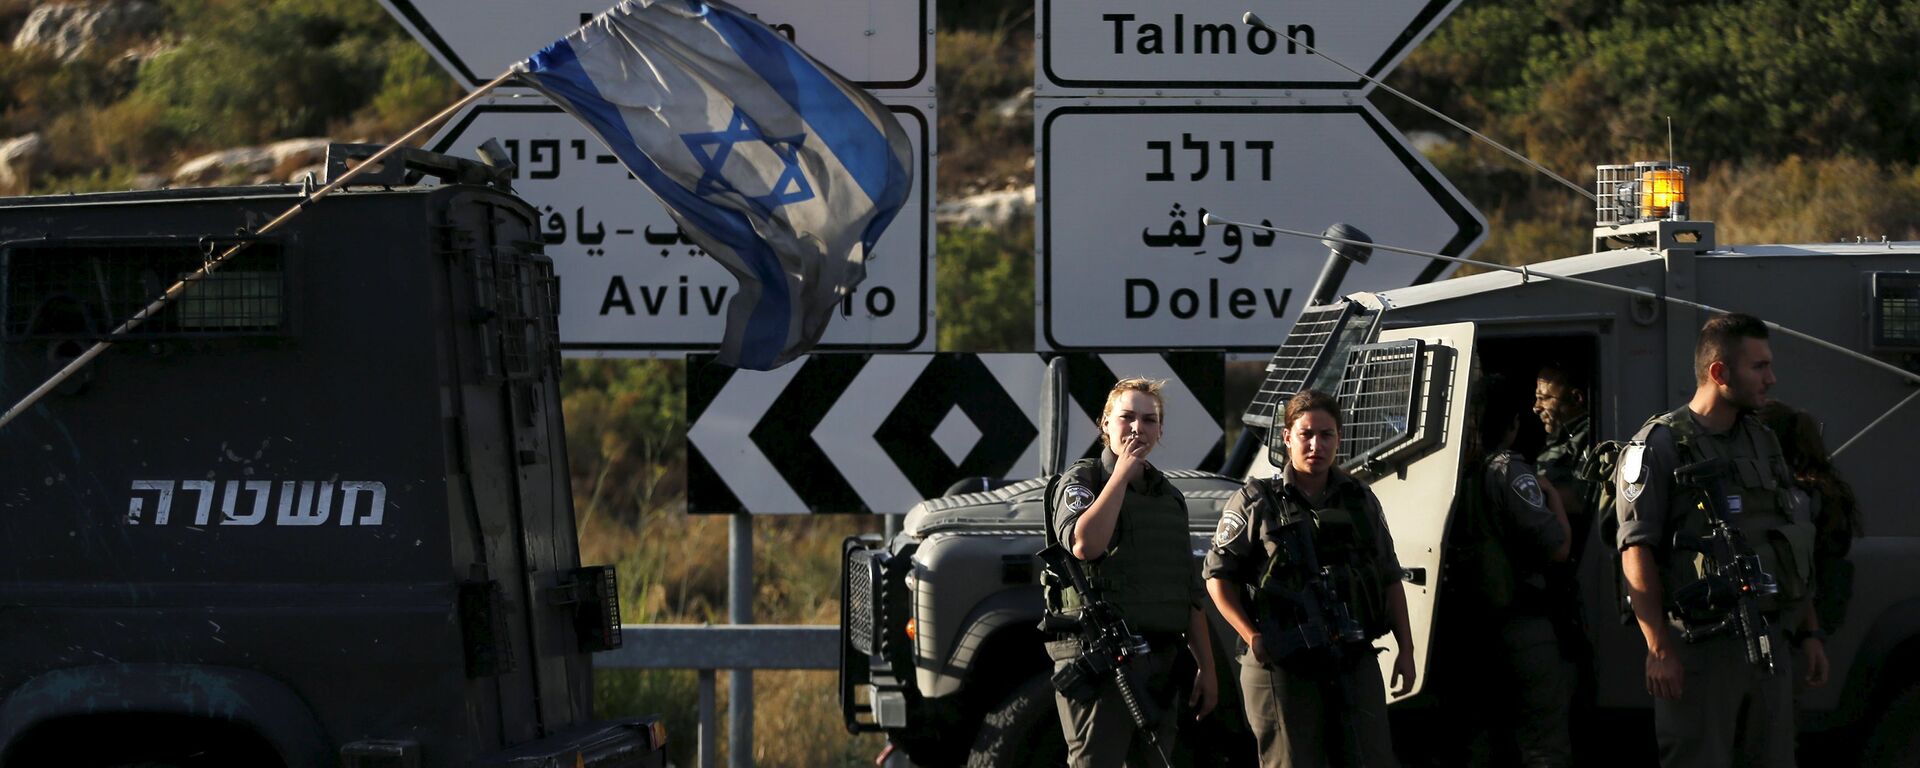 Israeli border police stand guard after a shooting attack, near the Jewish settlement of Dolev near the West Bank city of Ramallah June 19, 2015. - Sputnik Mundo, 1920, 09.11.2021